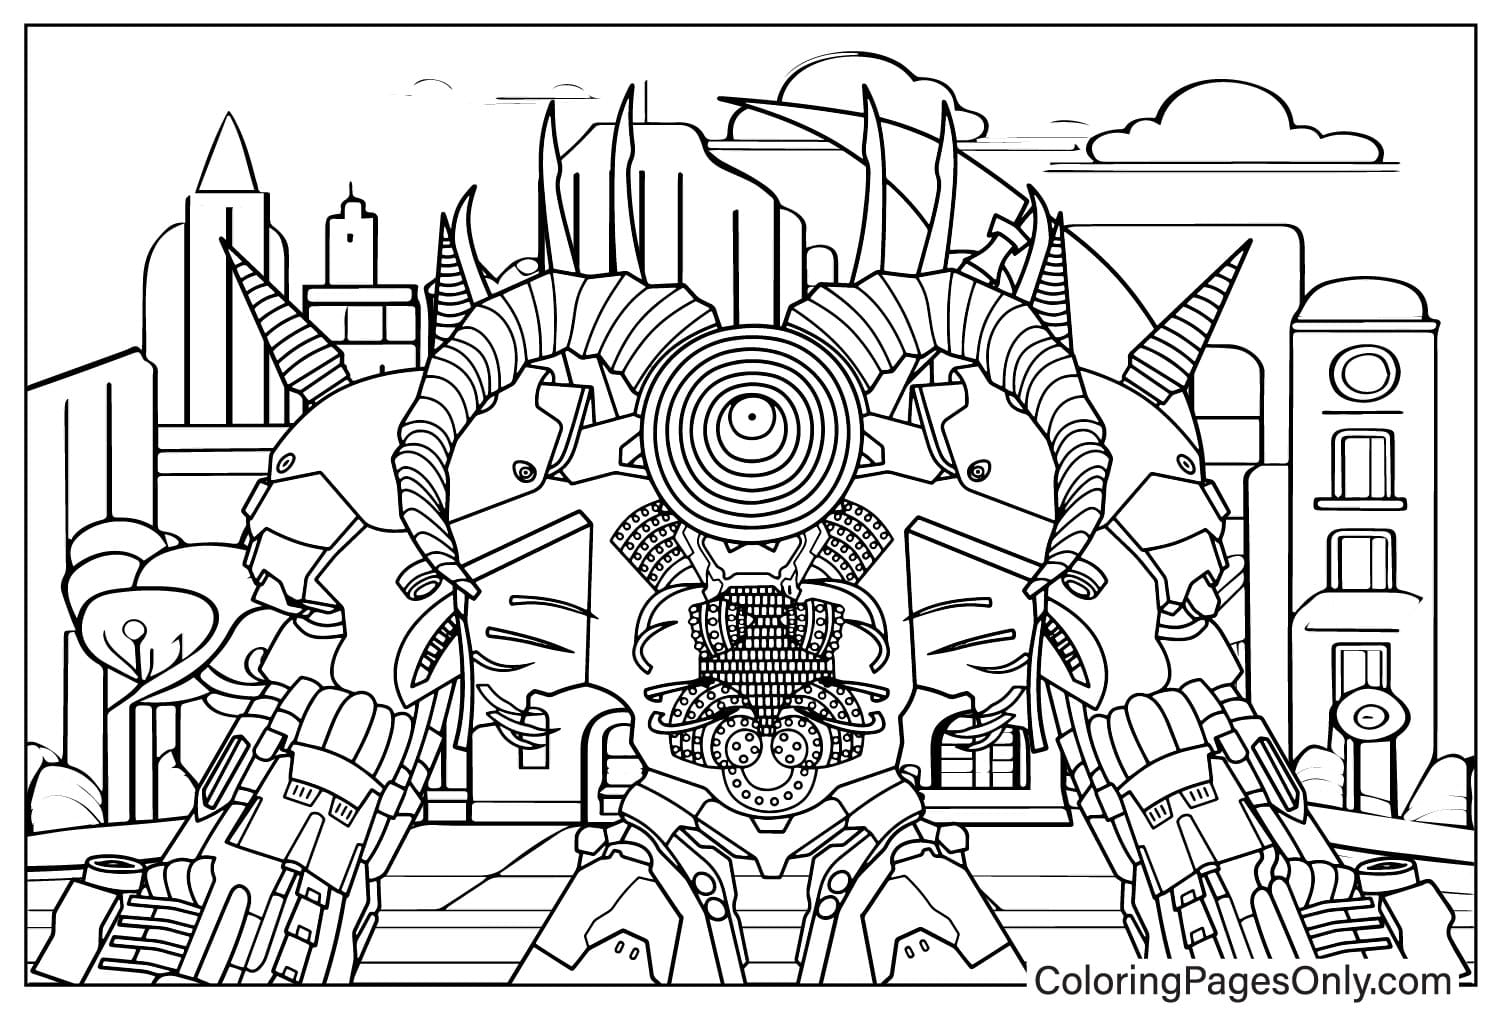 Upgraded Titan Drill Man Coloring Page JPG from Upgraded Titan Drill Man